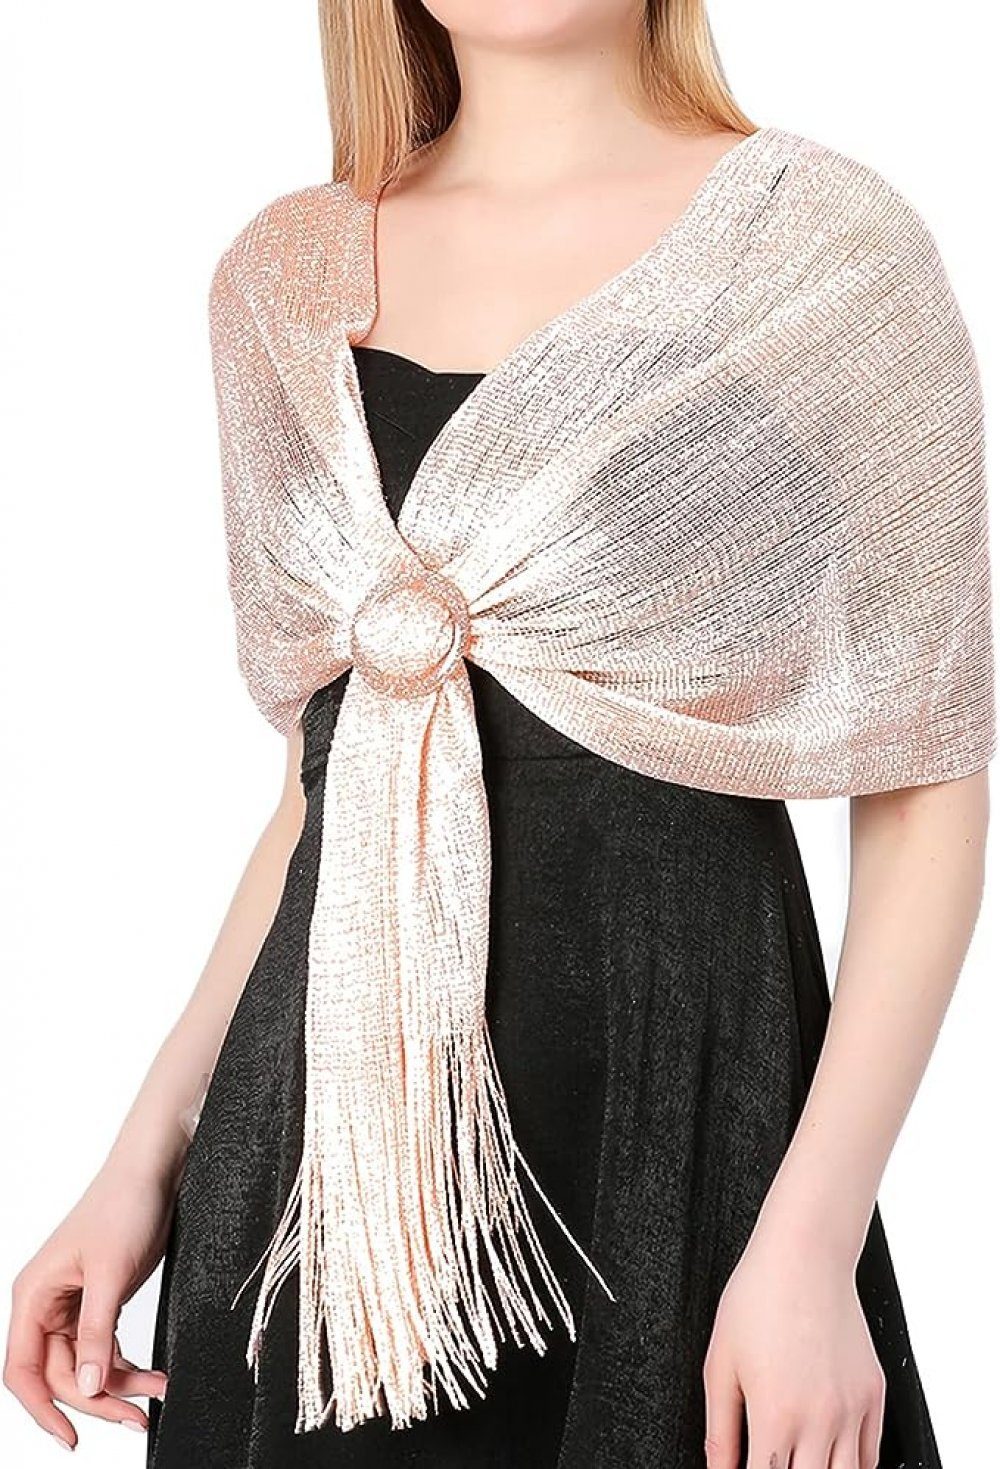 WaKuKa Schal Holiday metal buckle shawl suitable for sparkling evening parties Rosa